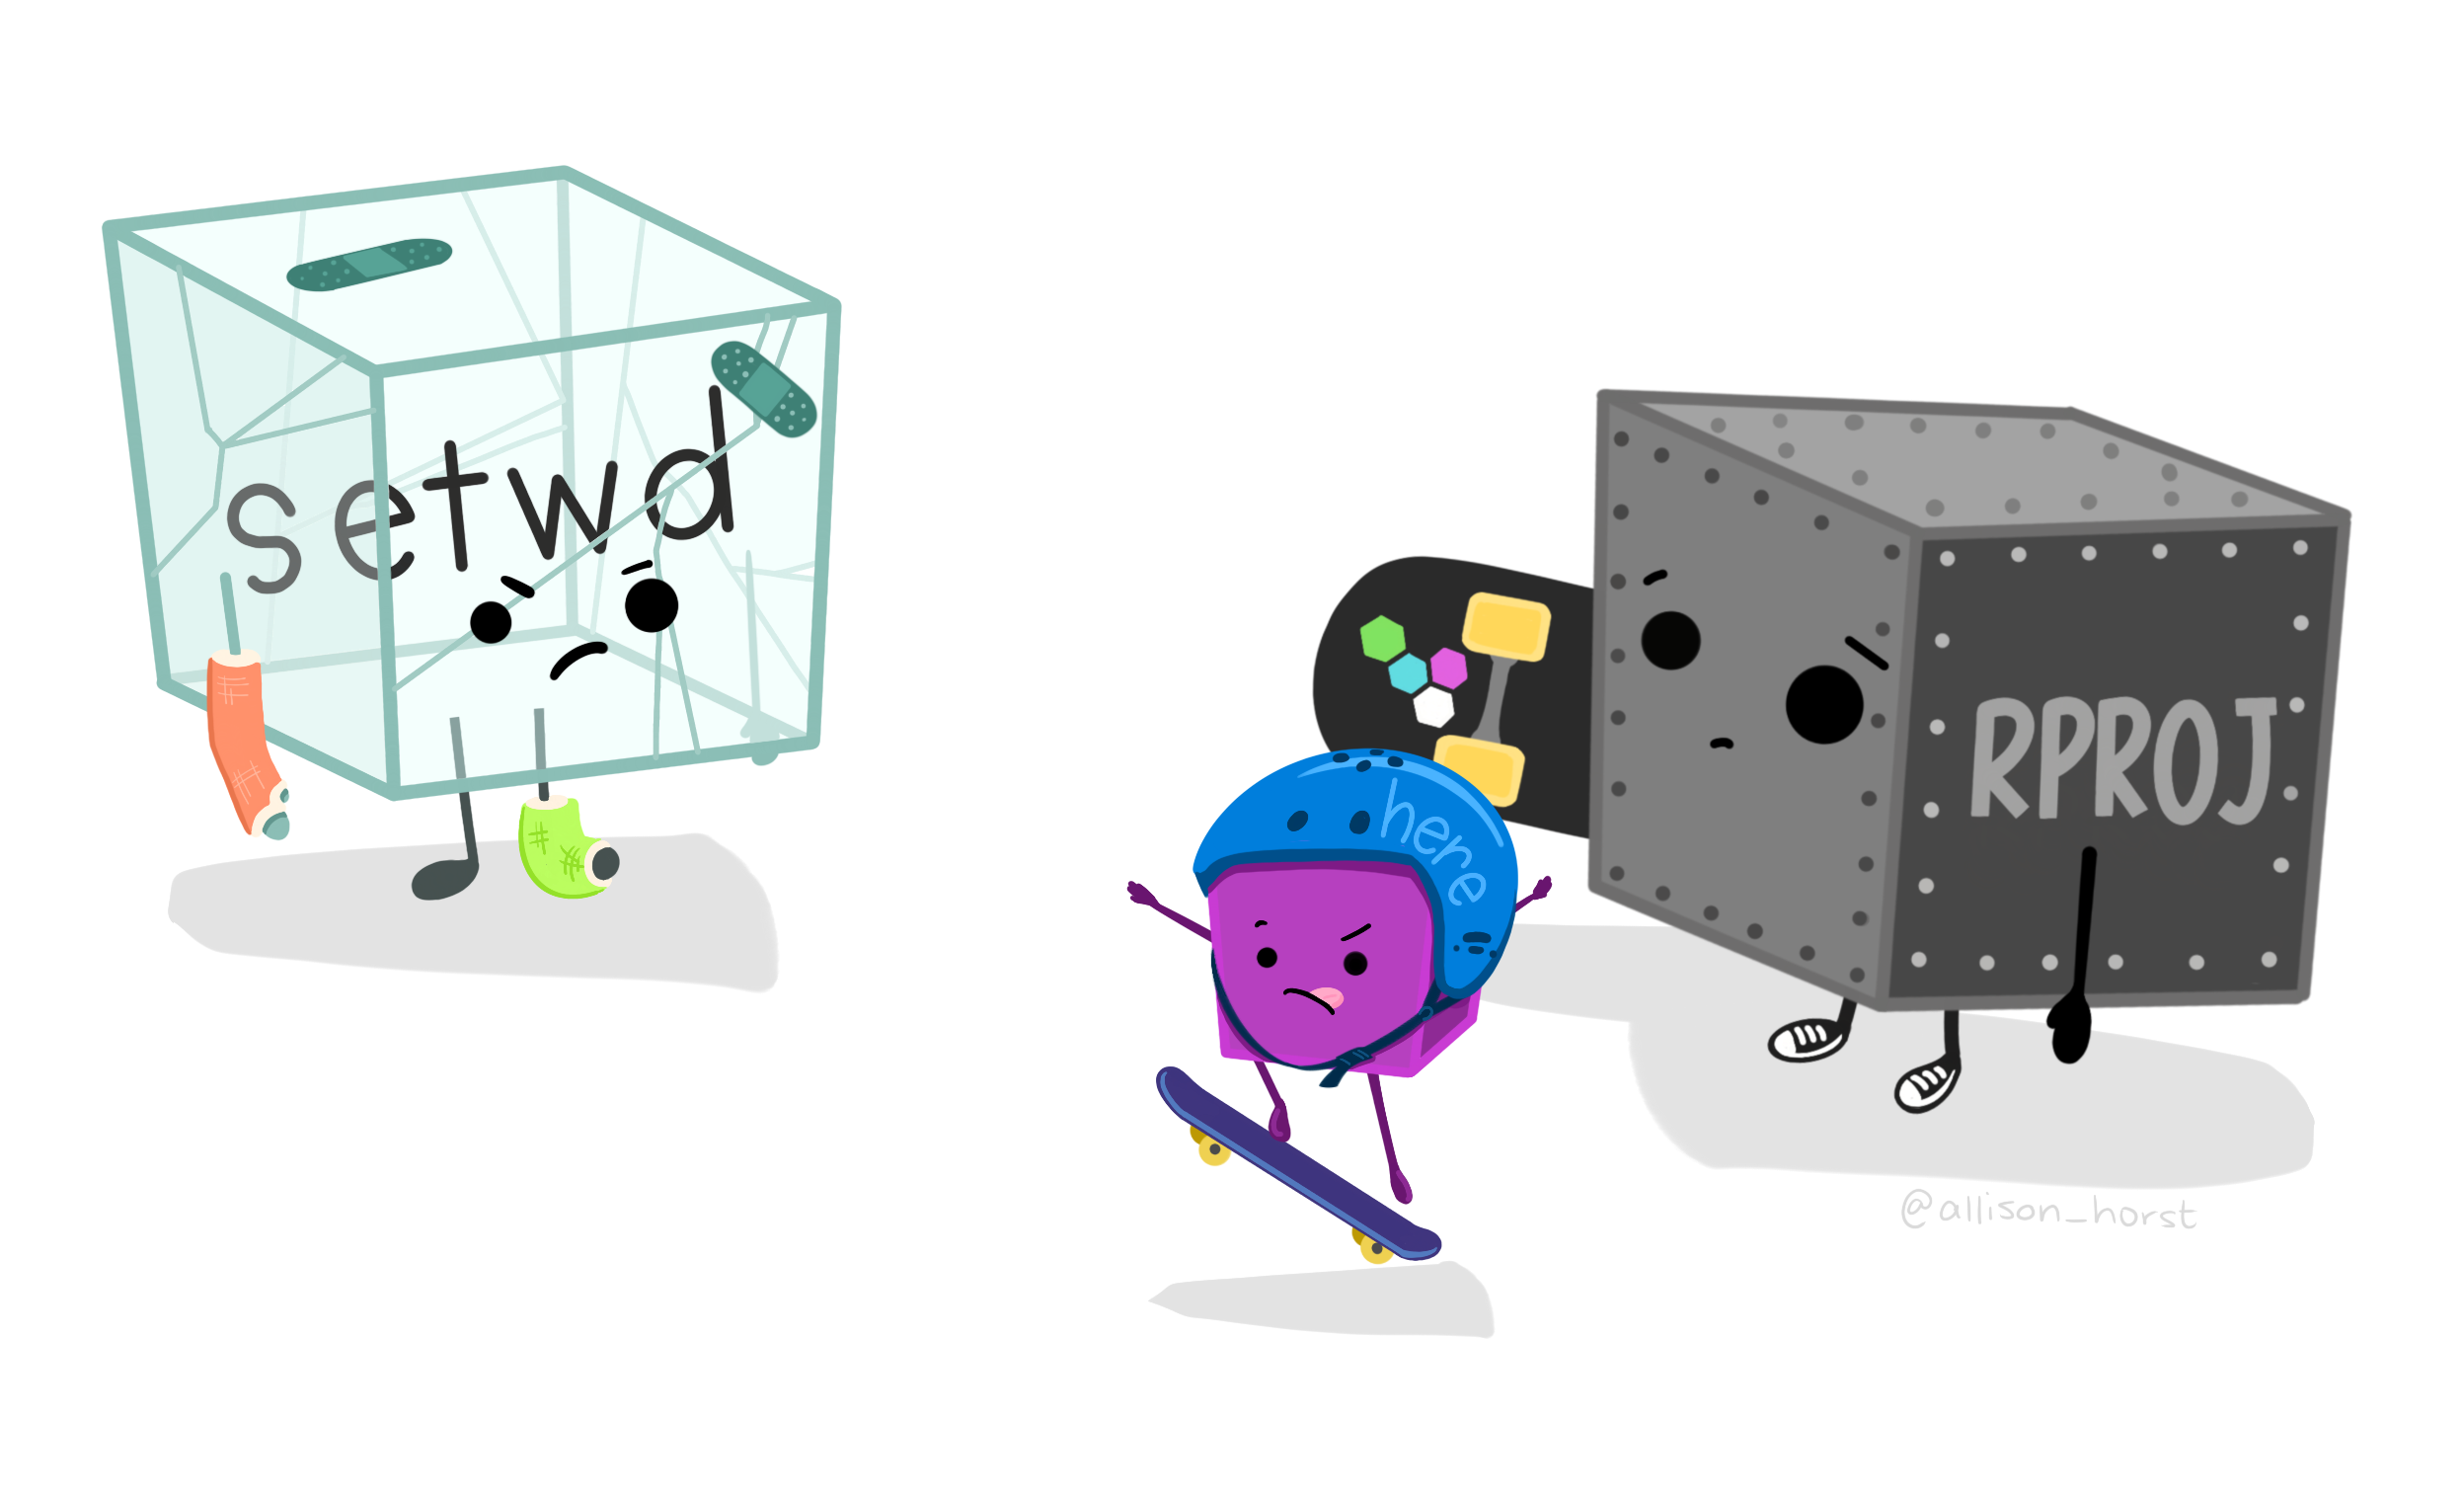 A cartoon of a cracked glass cube looking frustrated with casts on its arm and leg, with bandaids on it, containing “setwd”, looks on at a metal riveted cube labeled “R Proj” holding a skateboard looking sympathetic, and a smaller cube with a helmet on labeled “here” doing a trick on a skateboard.